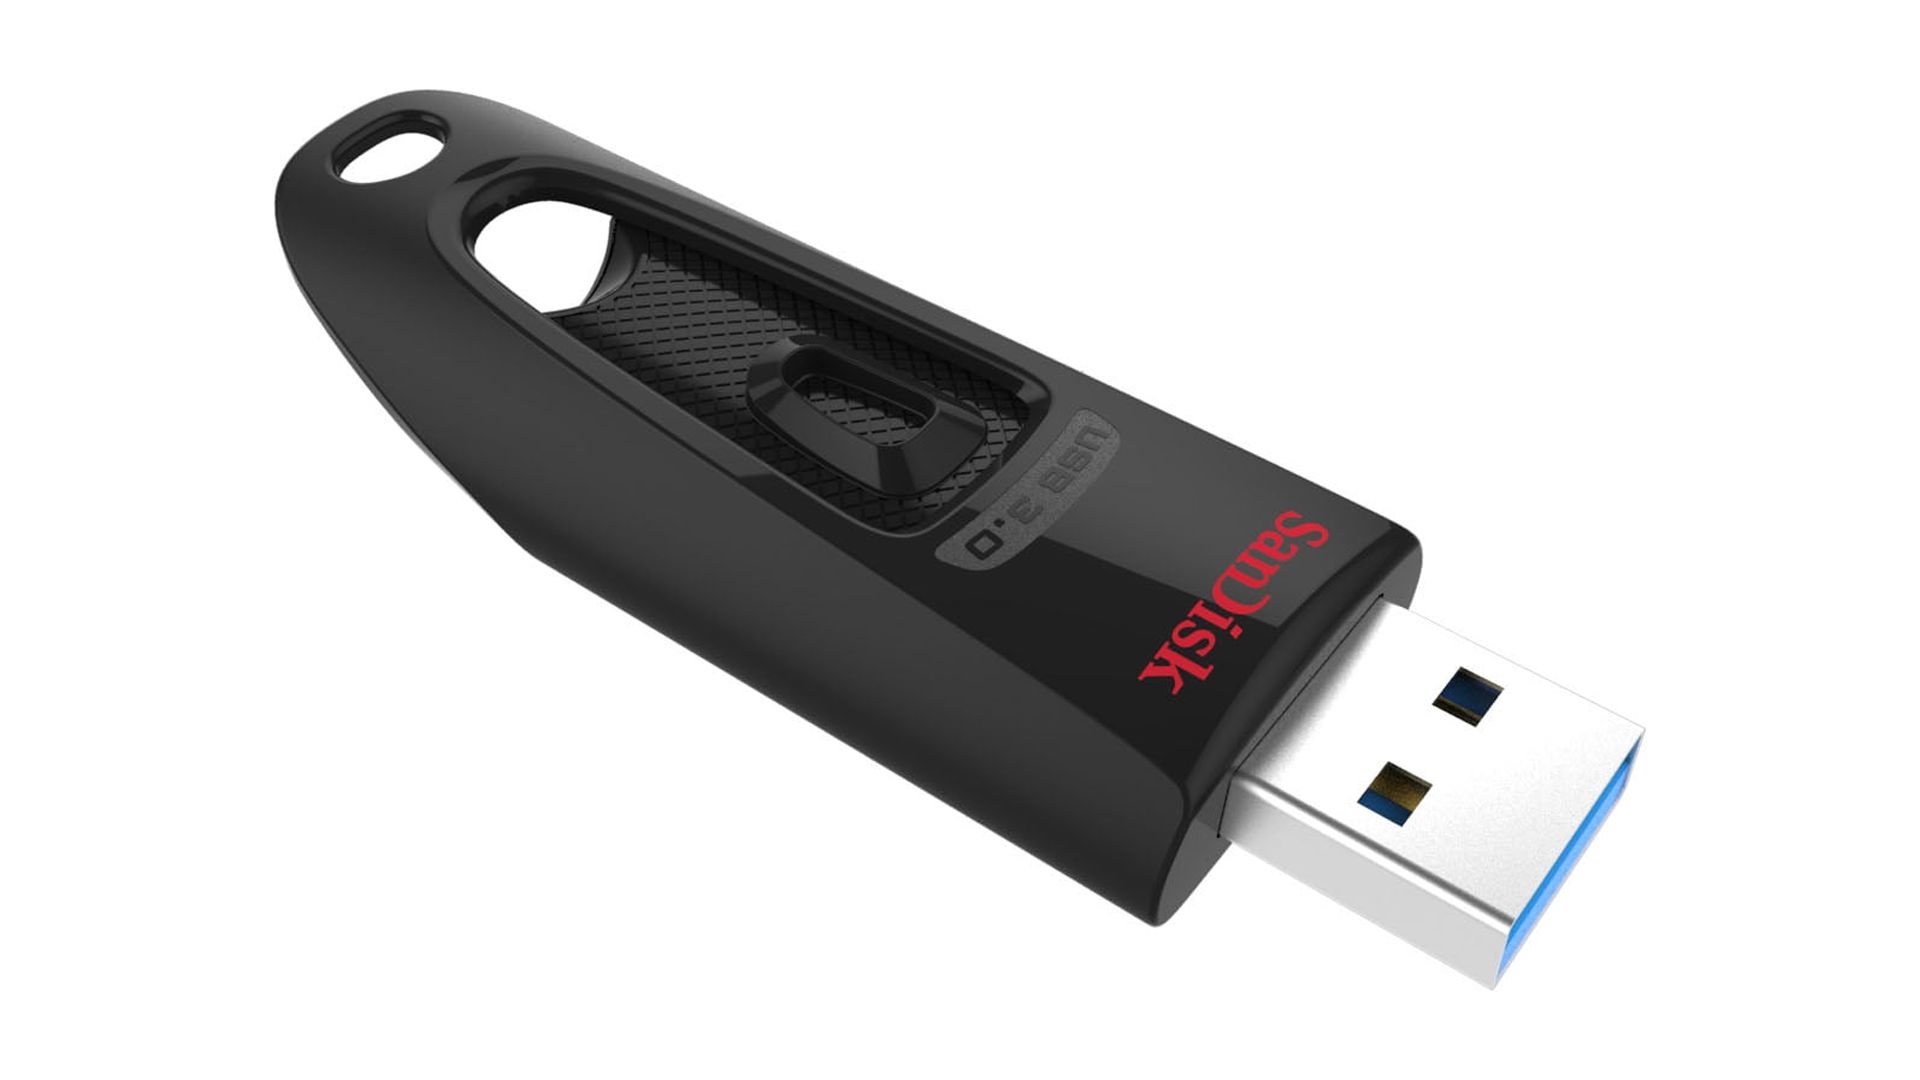 SanDisk 256GB Ultra USB 3.0 Flash Drive - 130MB/s - SDCZ48-256G-AW4 - image 5 of 8